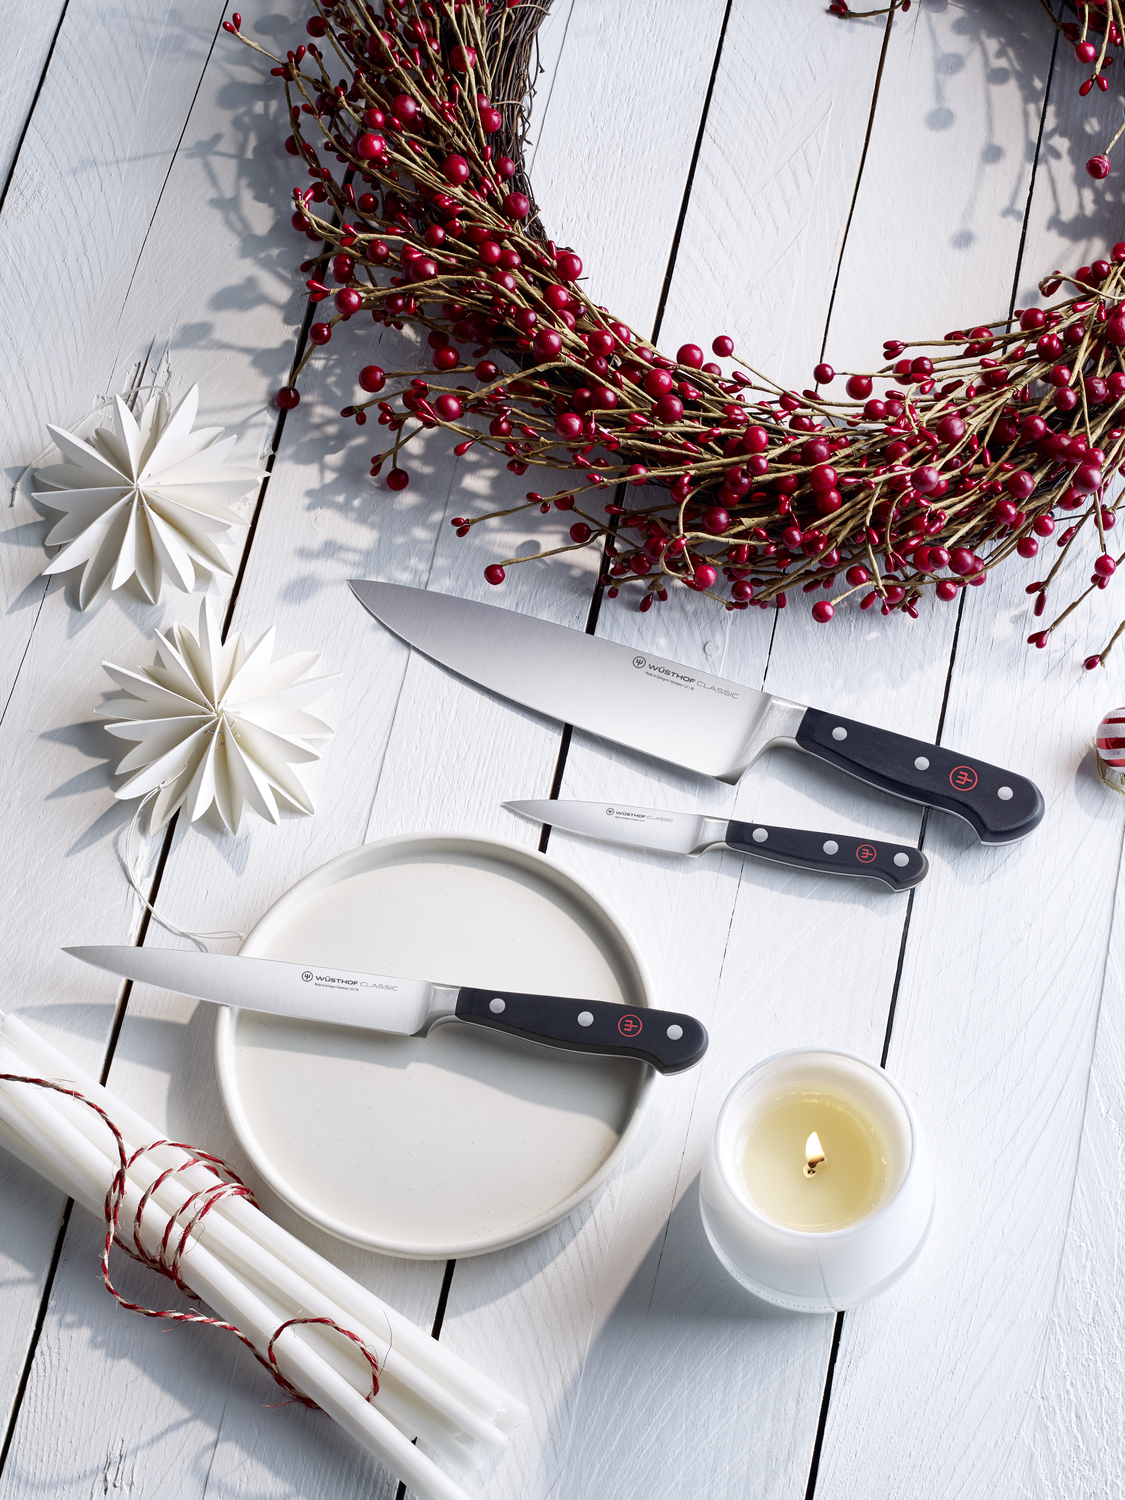 WÜSTHOF Classic Knives surrounded by a red wreath and a white candle